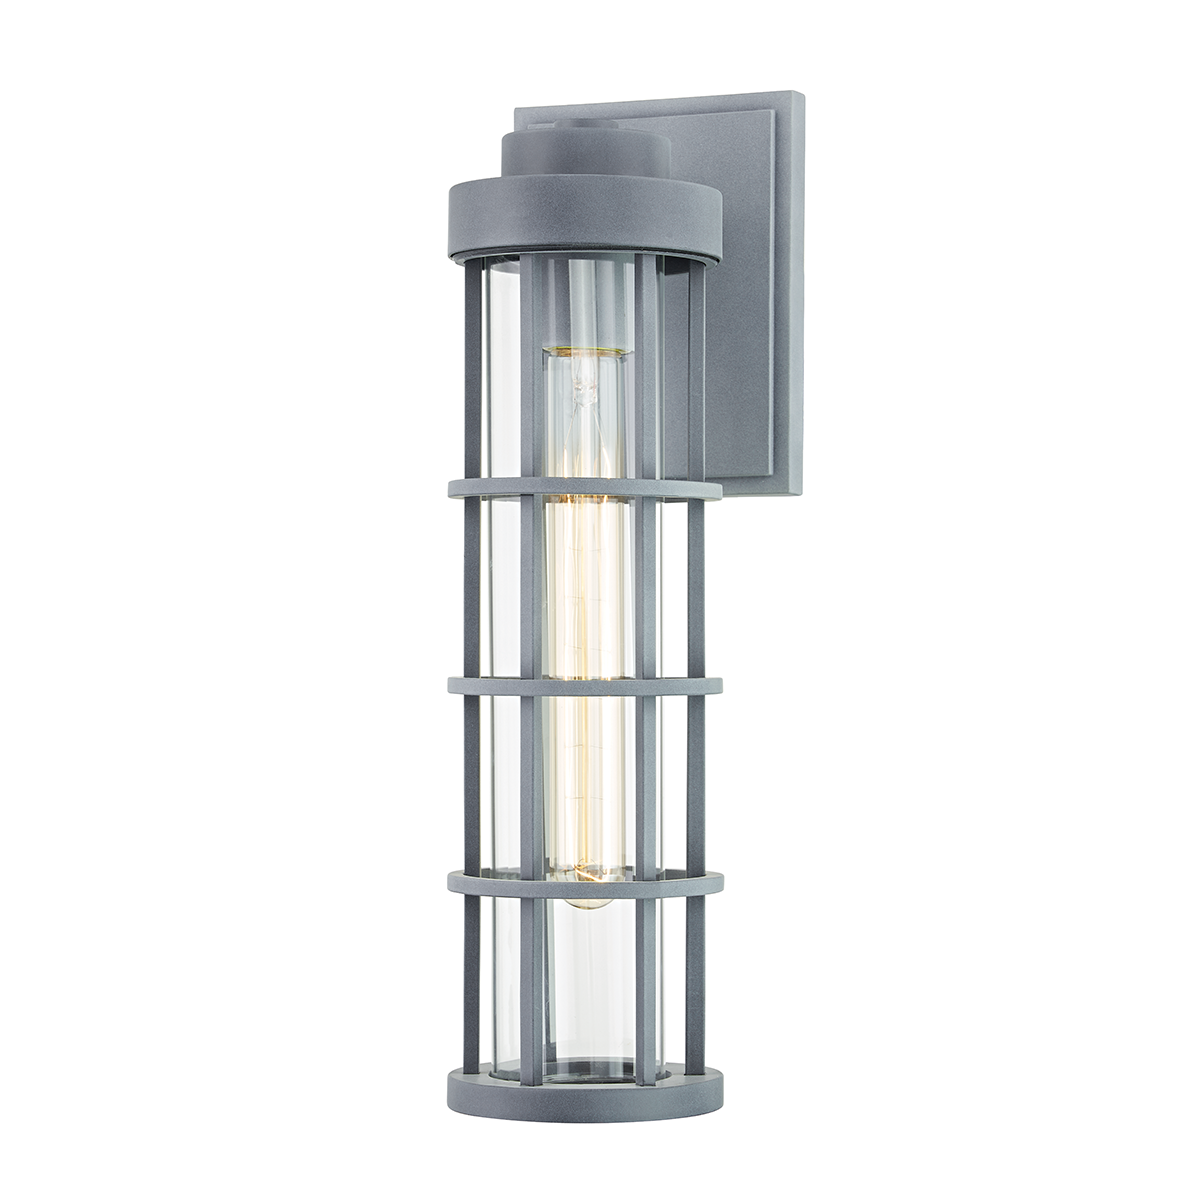 Troy MESA 1 LIGHT LARGE EXTERIOR WALL SCONCE B2042 Outdoor l Wall Troy Lighting   